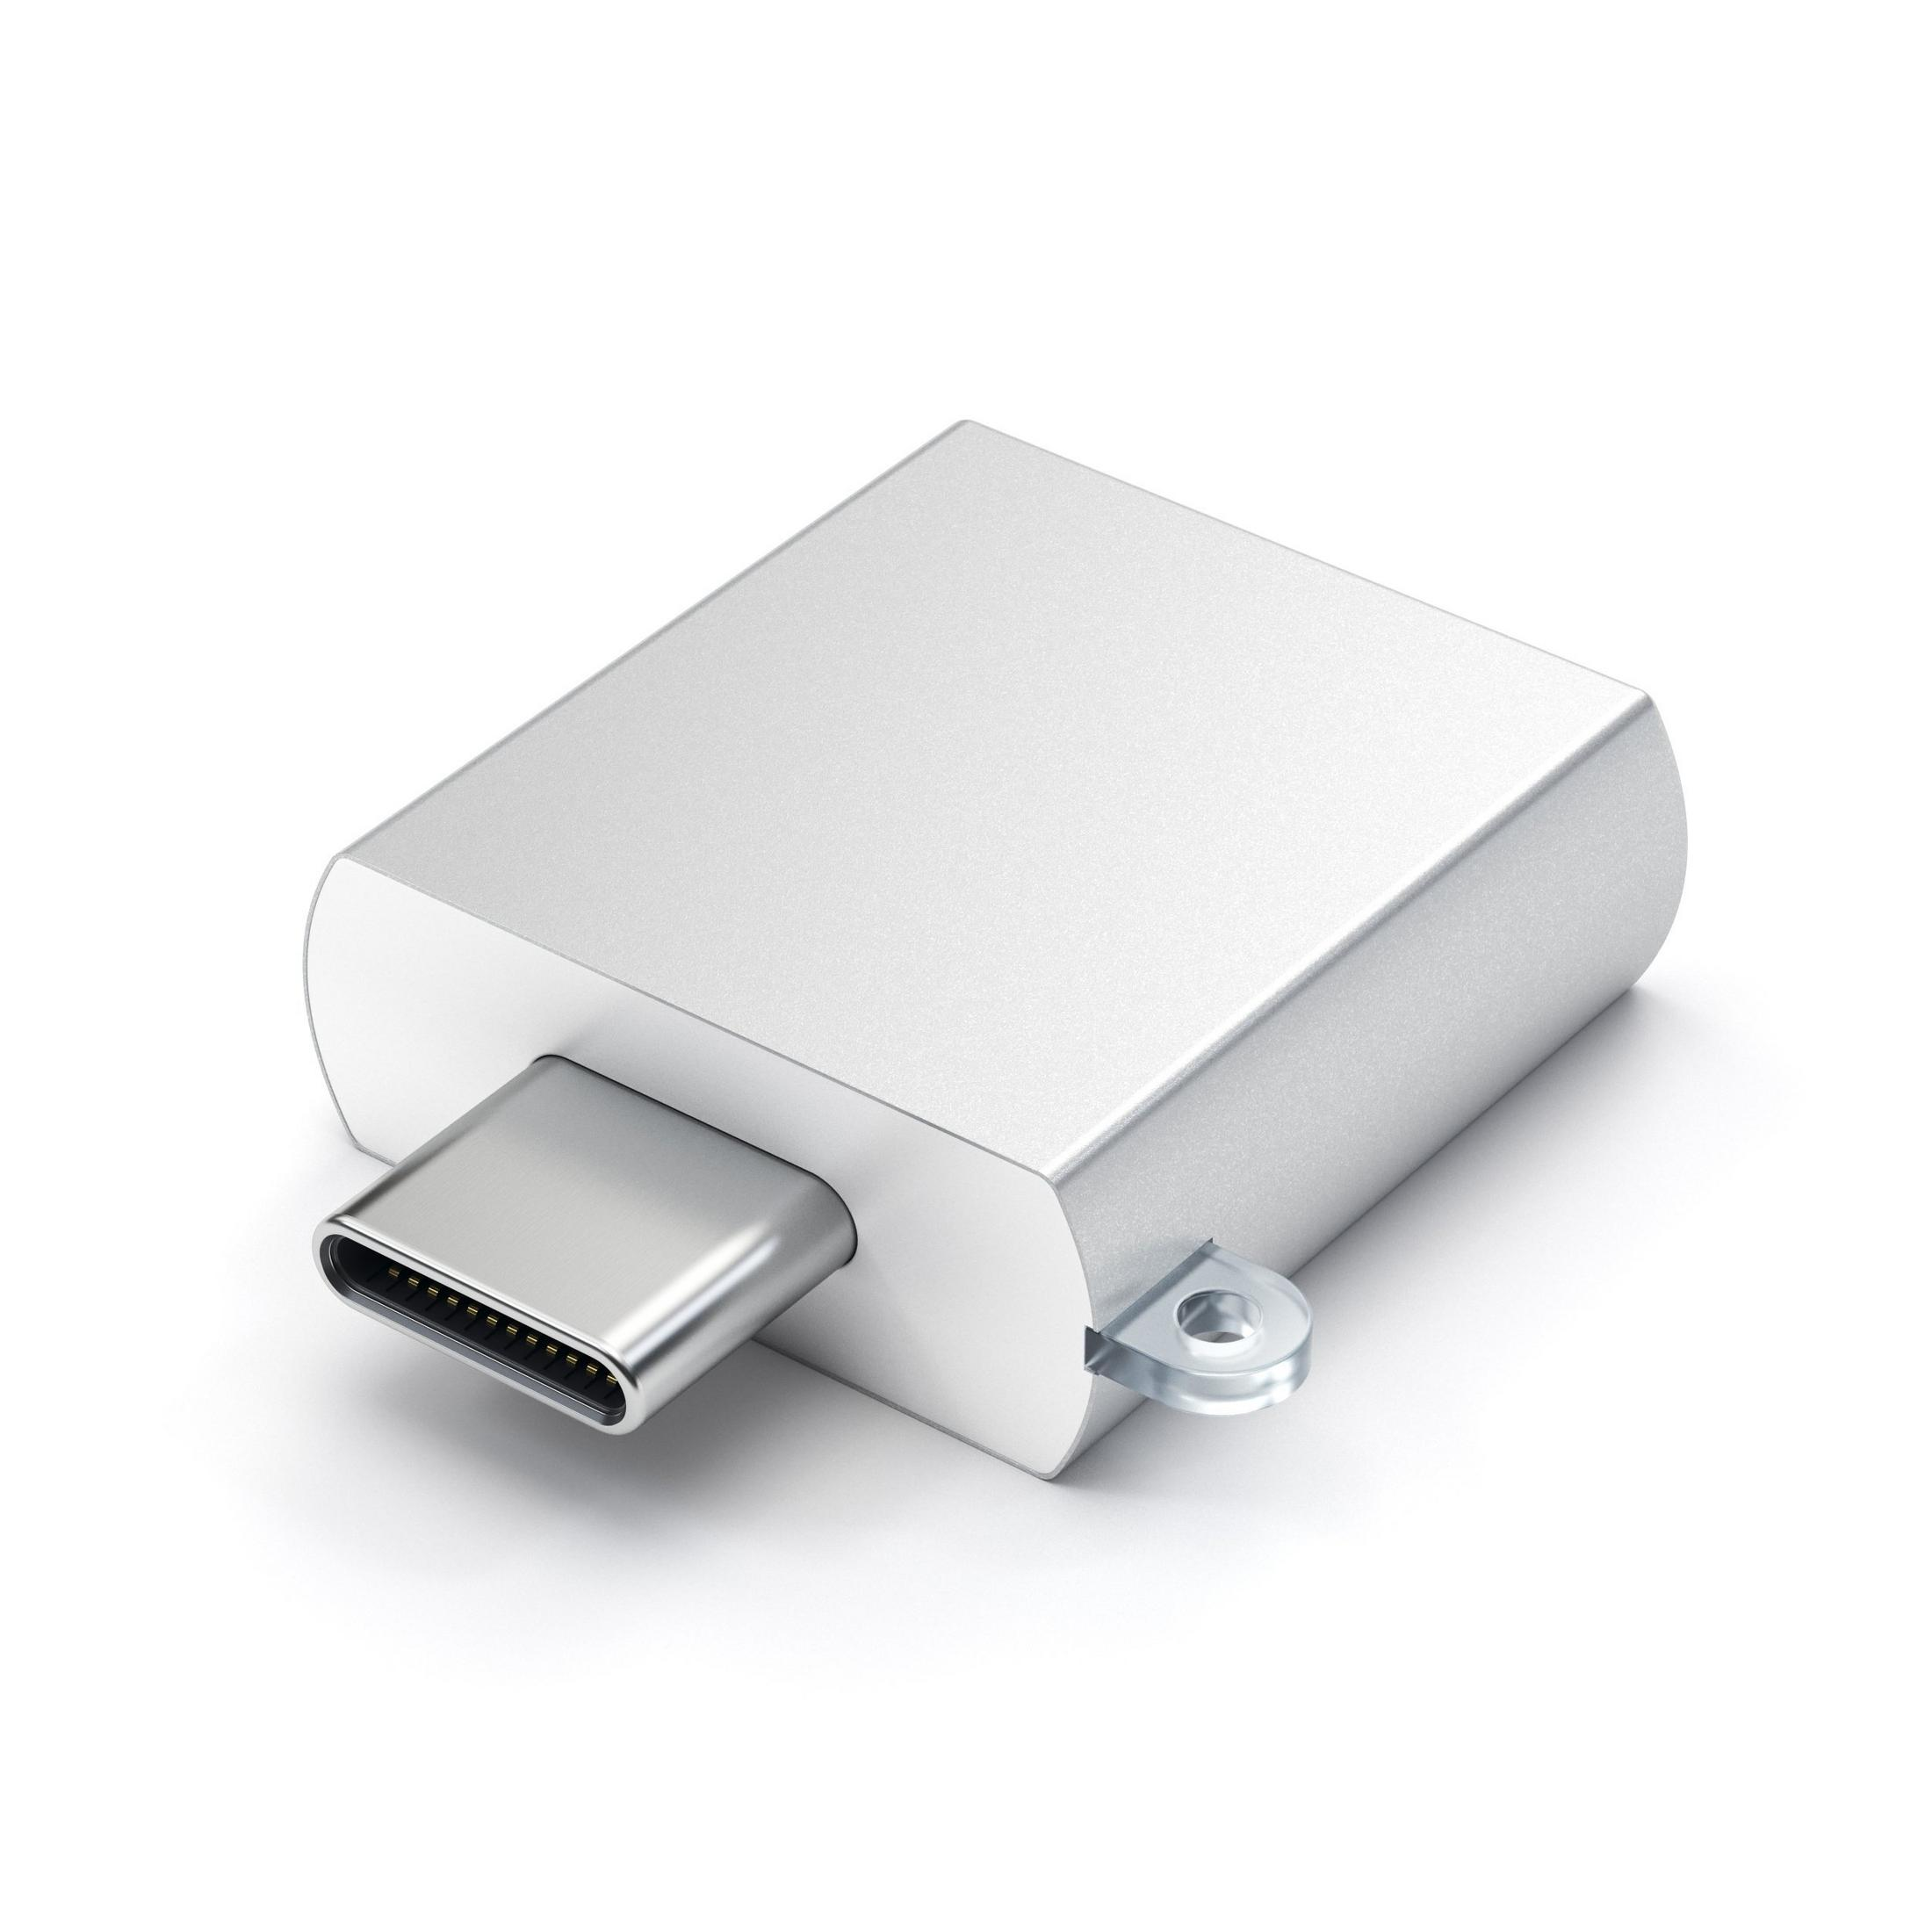 SATECHI 179965 TYPE-C USB ADAPTER SILBER Silber Adapter